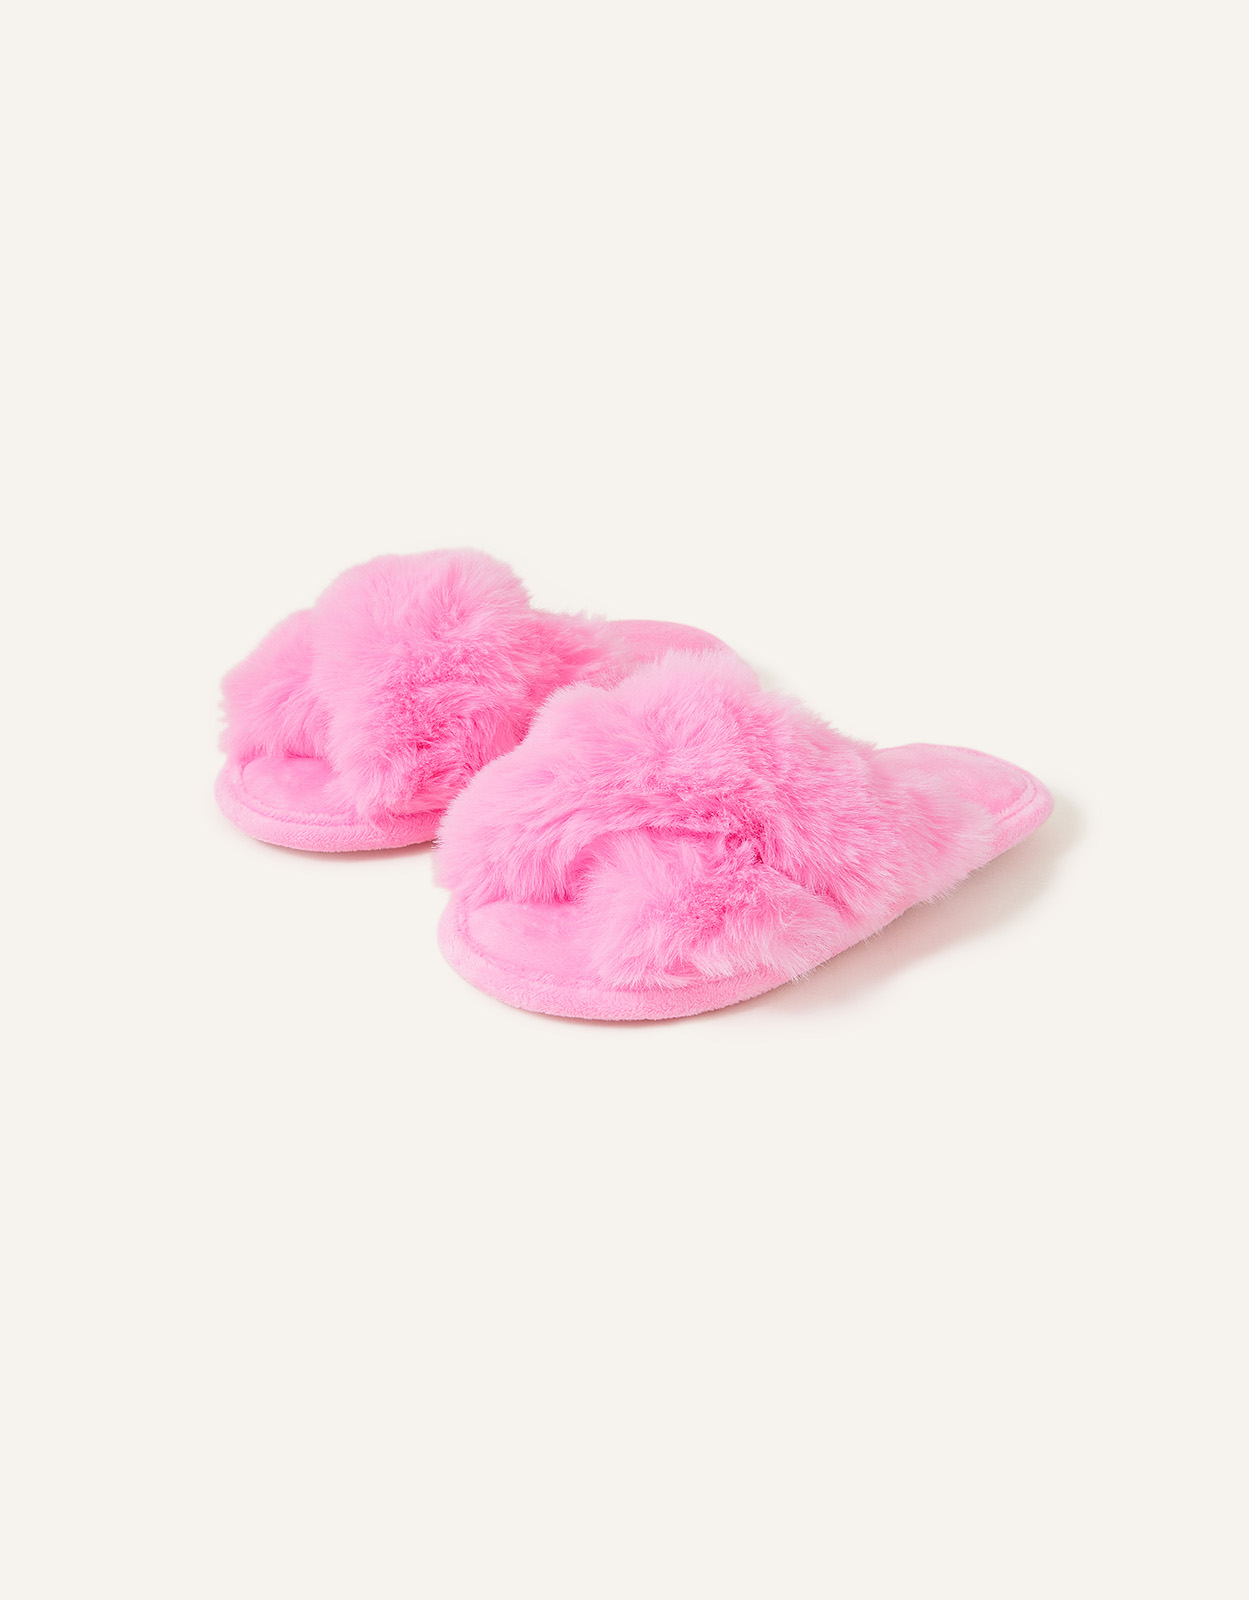 Accessorize Girl's Girls Faux Fur Sliders Pink, Size: 11-12